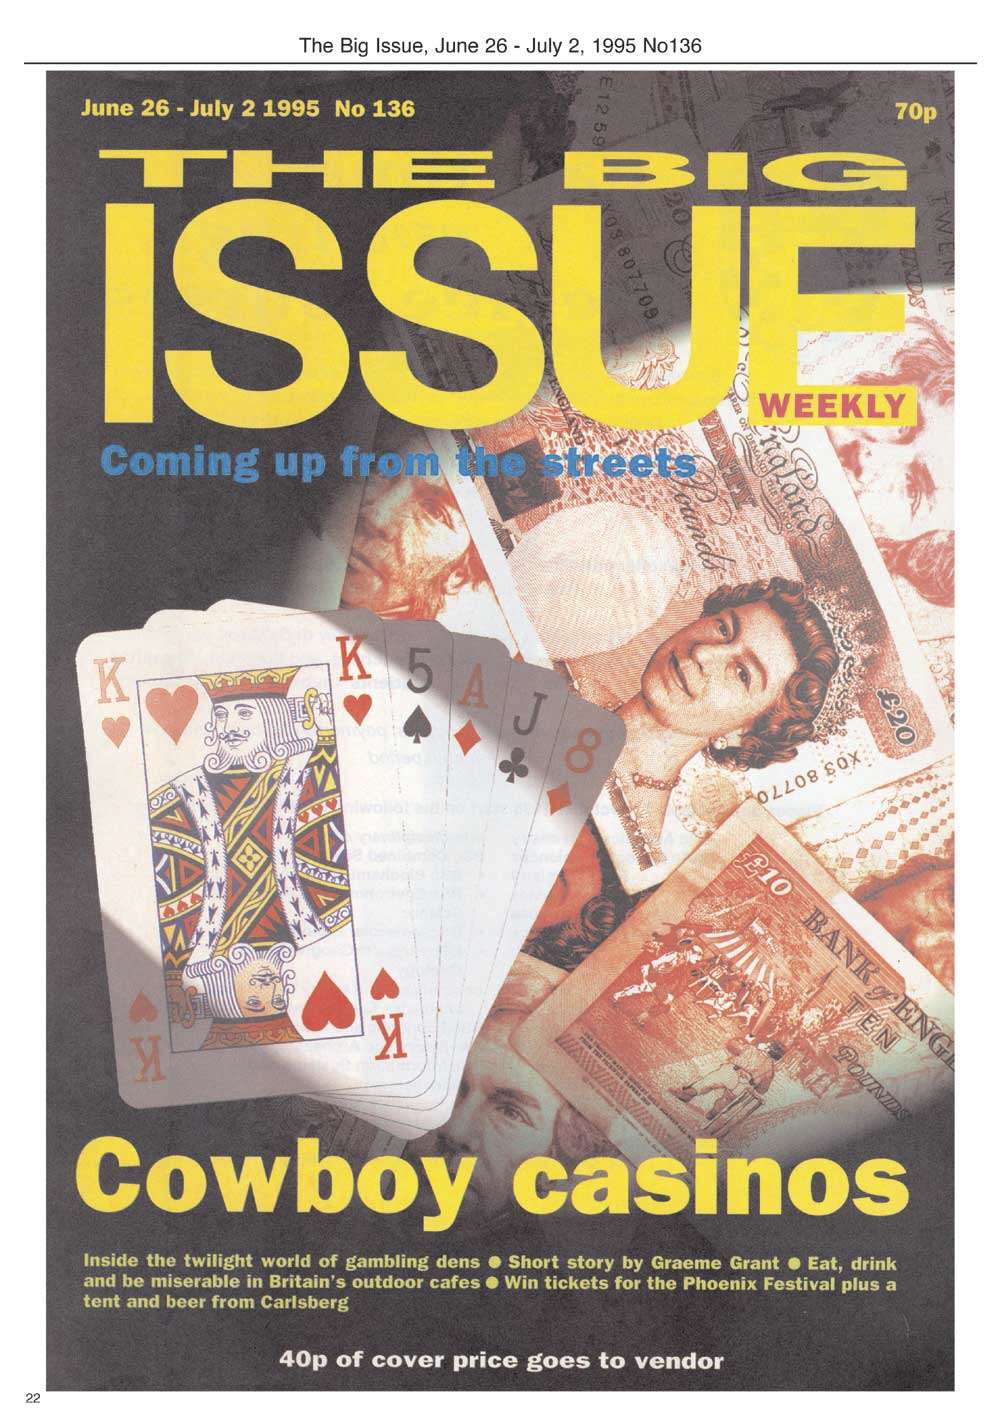 The Big Issue, June 26 - July 2, 1995 No136 - Page 01